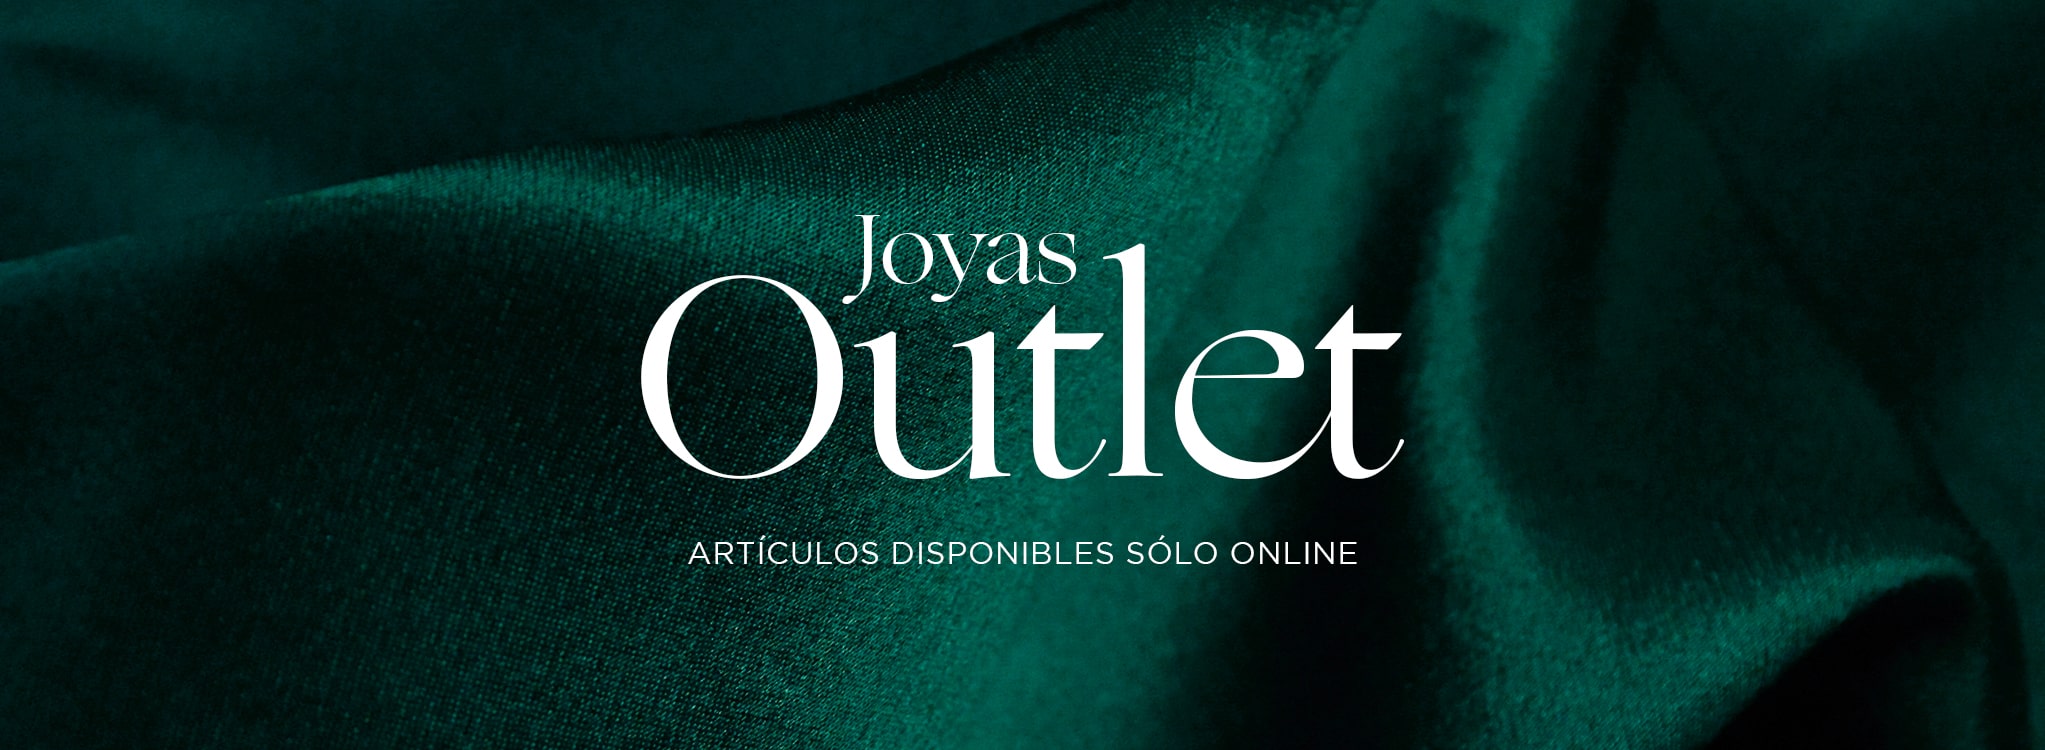 “outlet